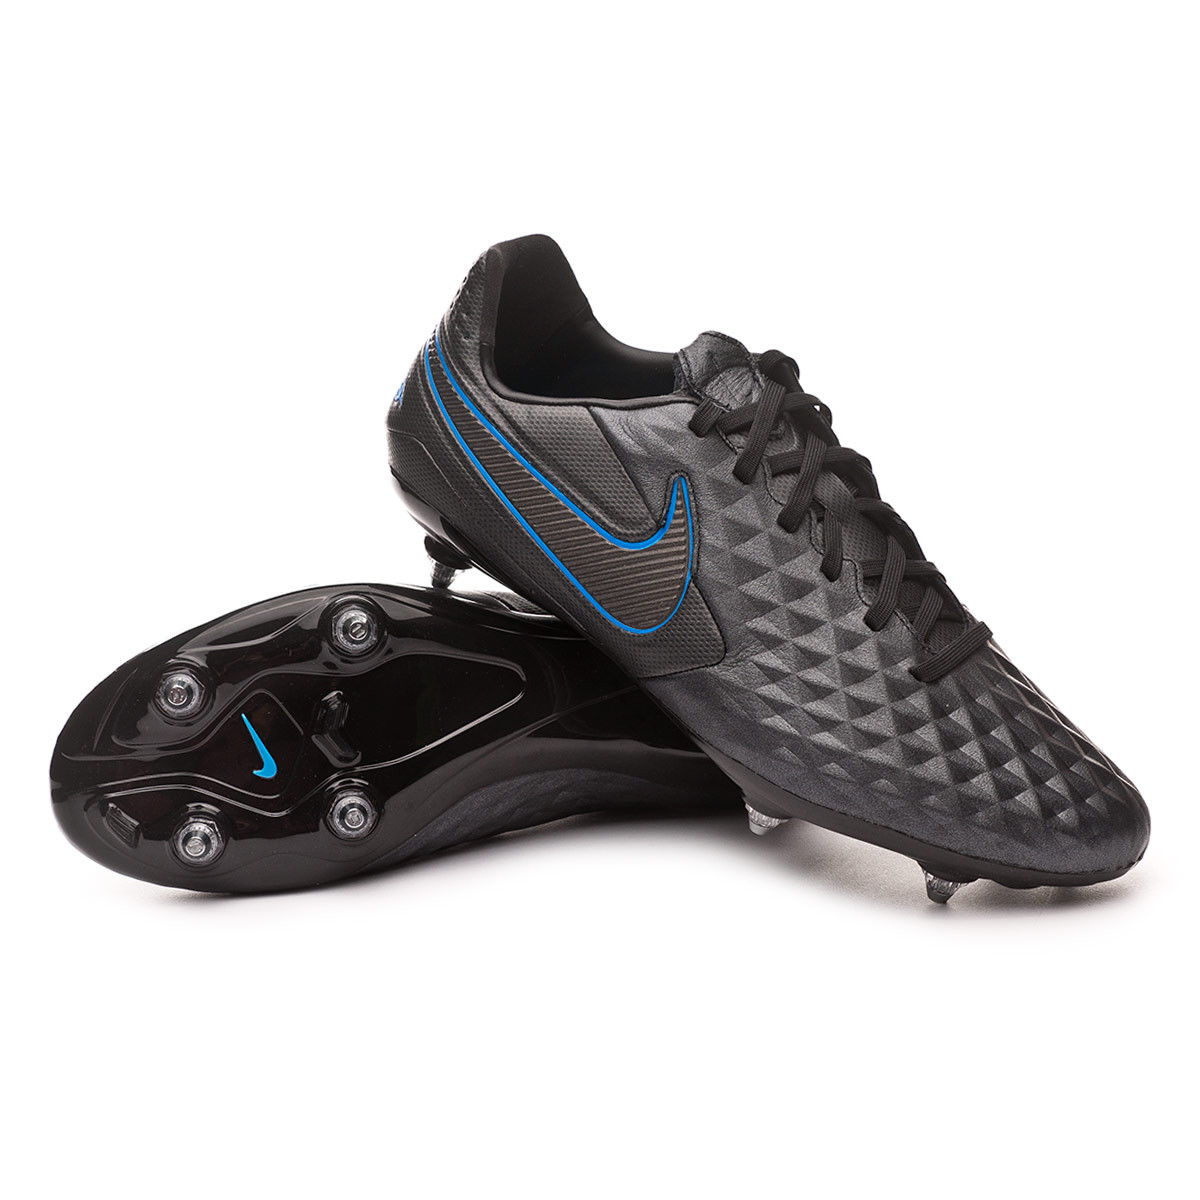 nike football boots black and blue